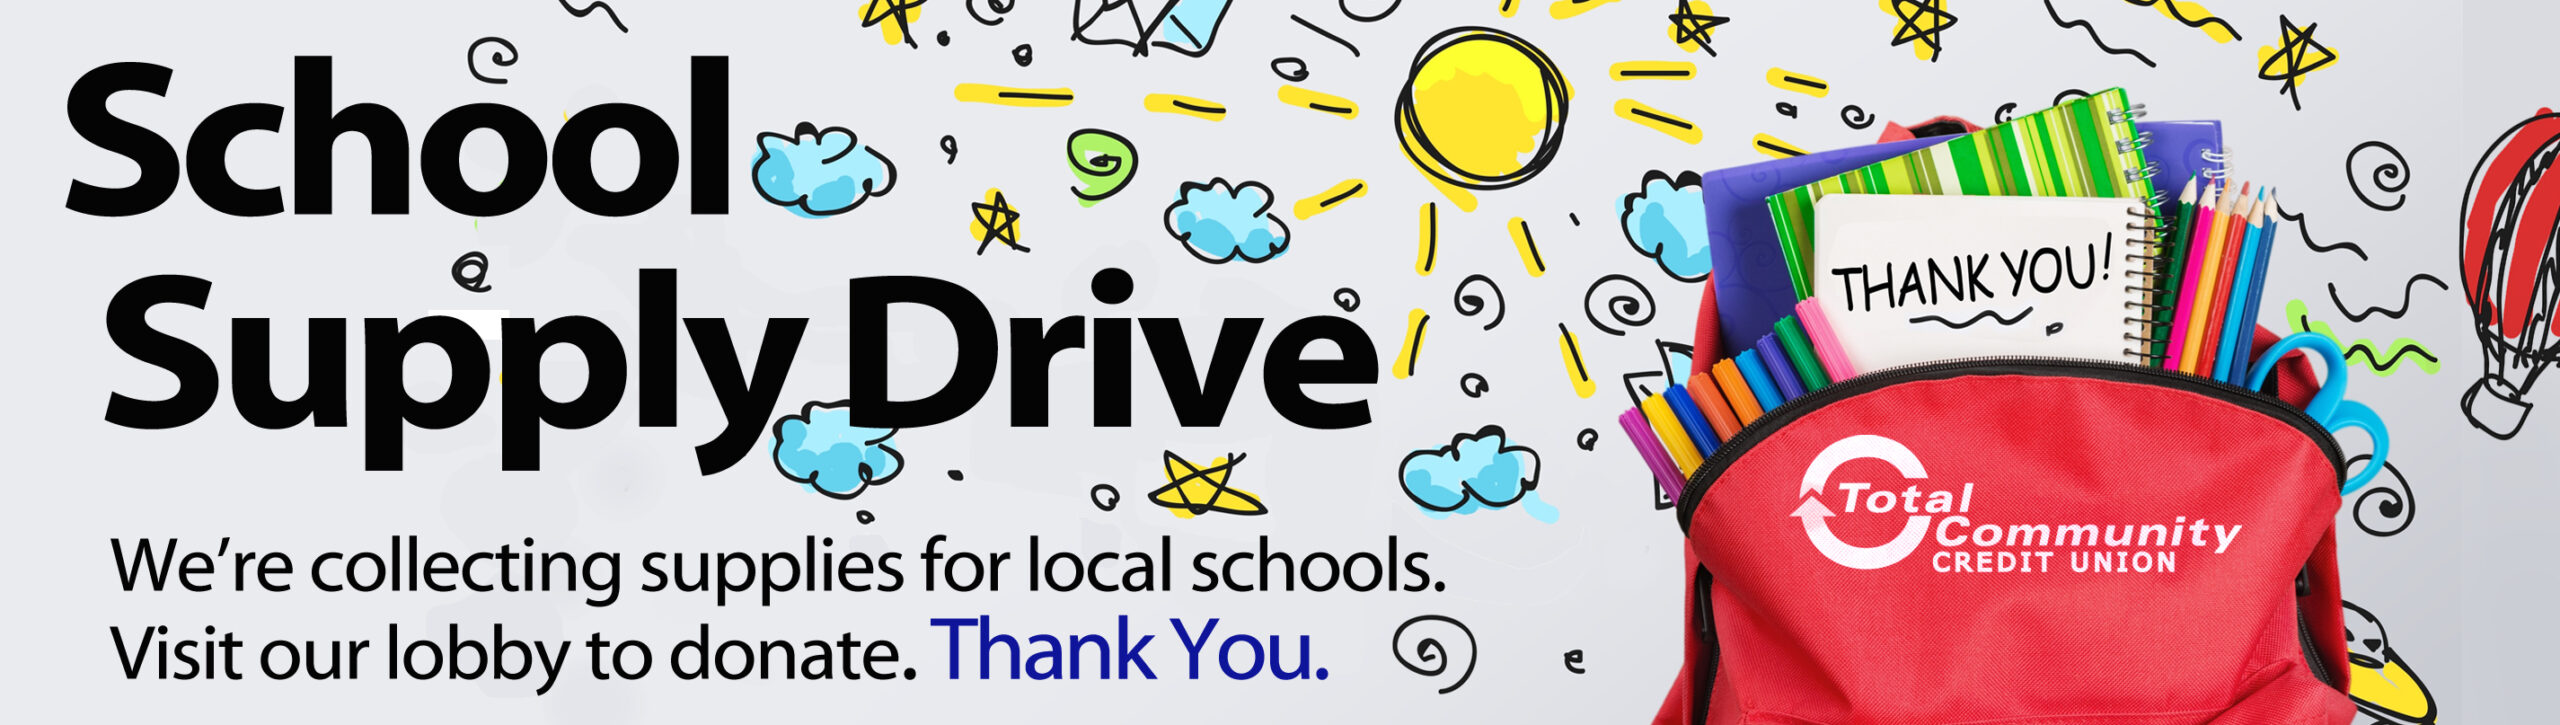 School Supply Drive. We're collecting supplies for local schools. Visit our lobby to donate. Thank you.